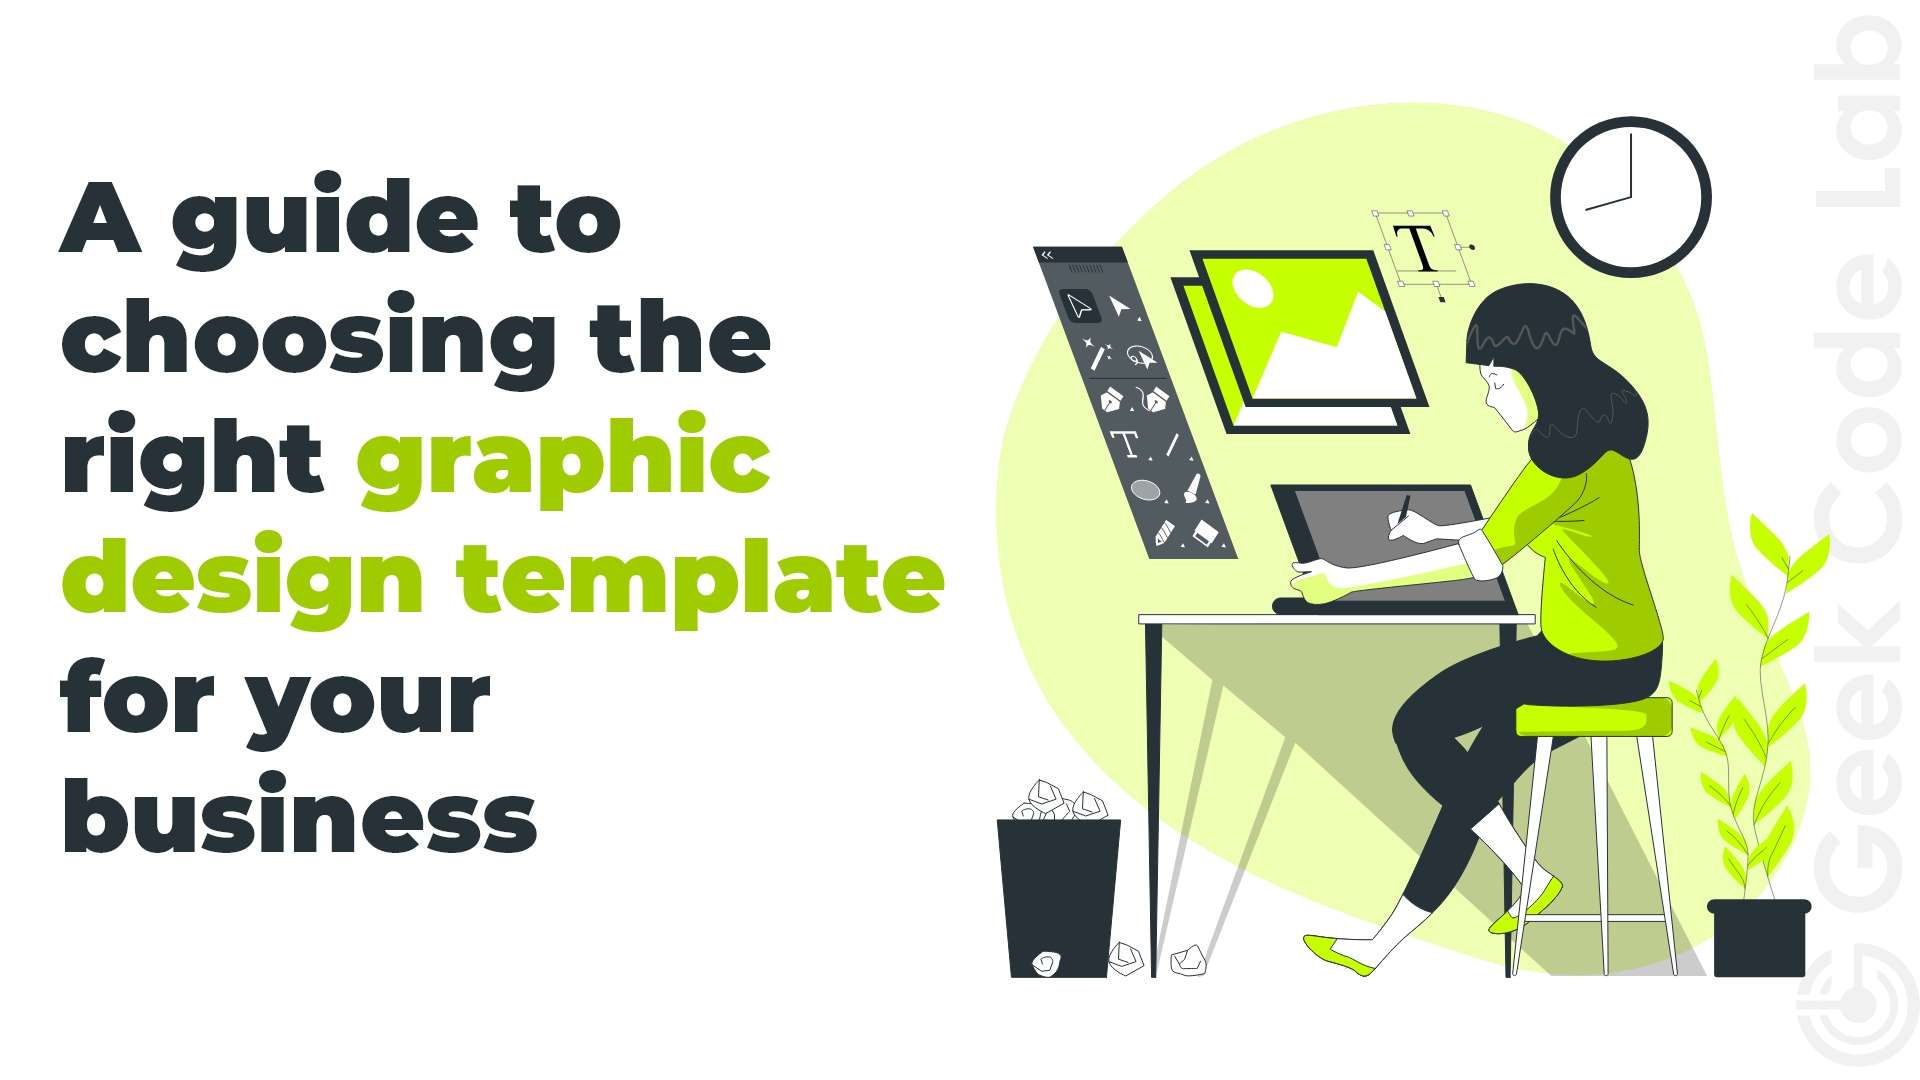 A Guide to Choosing the Right Graphic Design Template for your Business